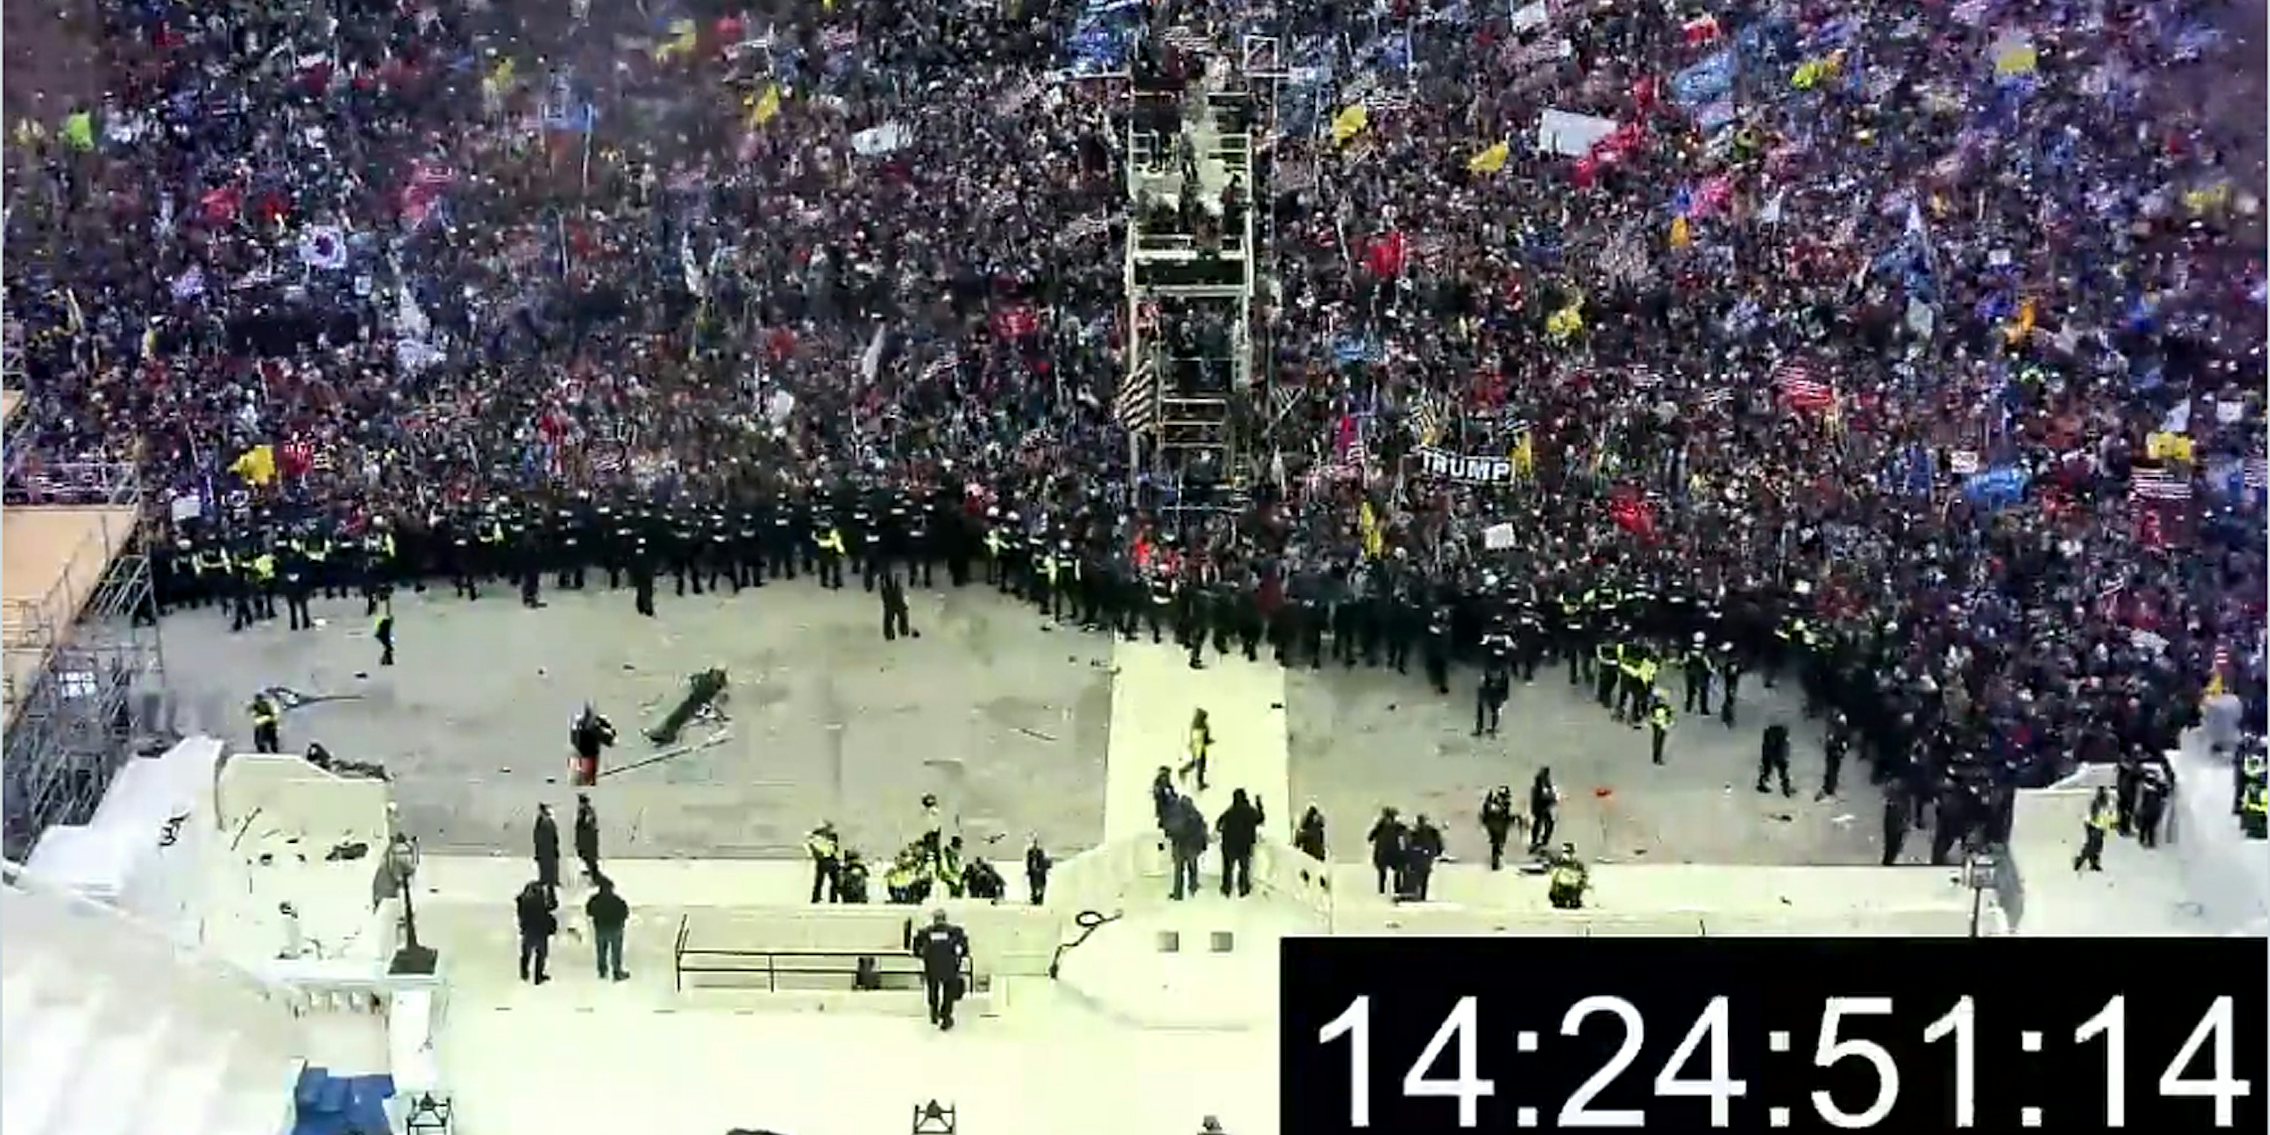 crowd rushing capital with 14:24:51:14 timestamp in bottom right corner